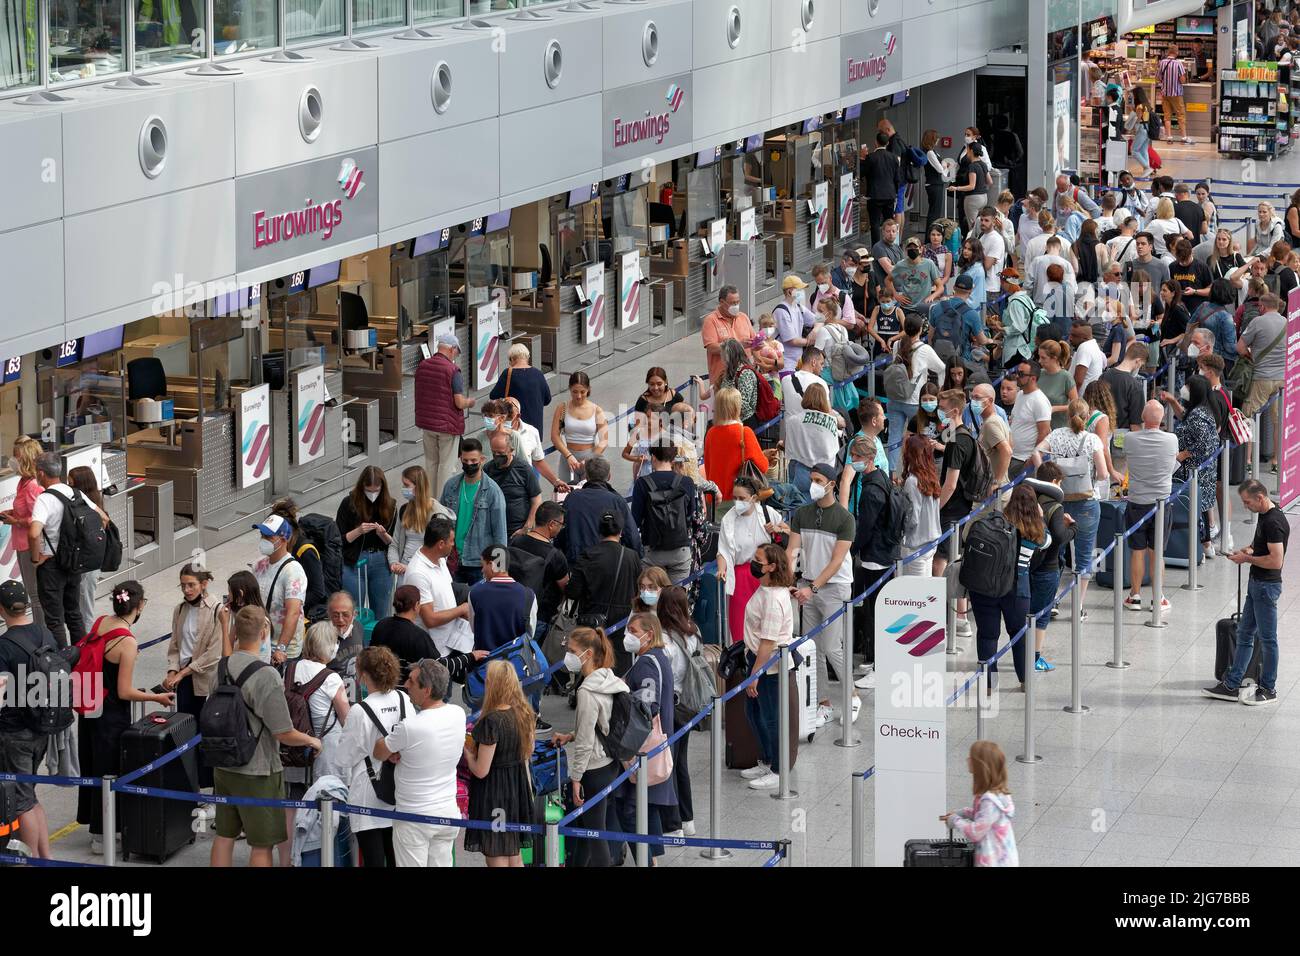 Passengers wait for check-in in front of the Eurowings check-in counter, queue during the summer holidays, Duesseldorf Airport, North Stock Photo